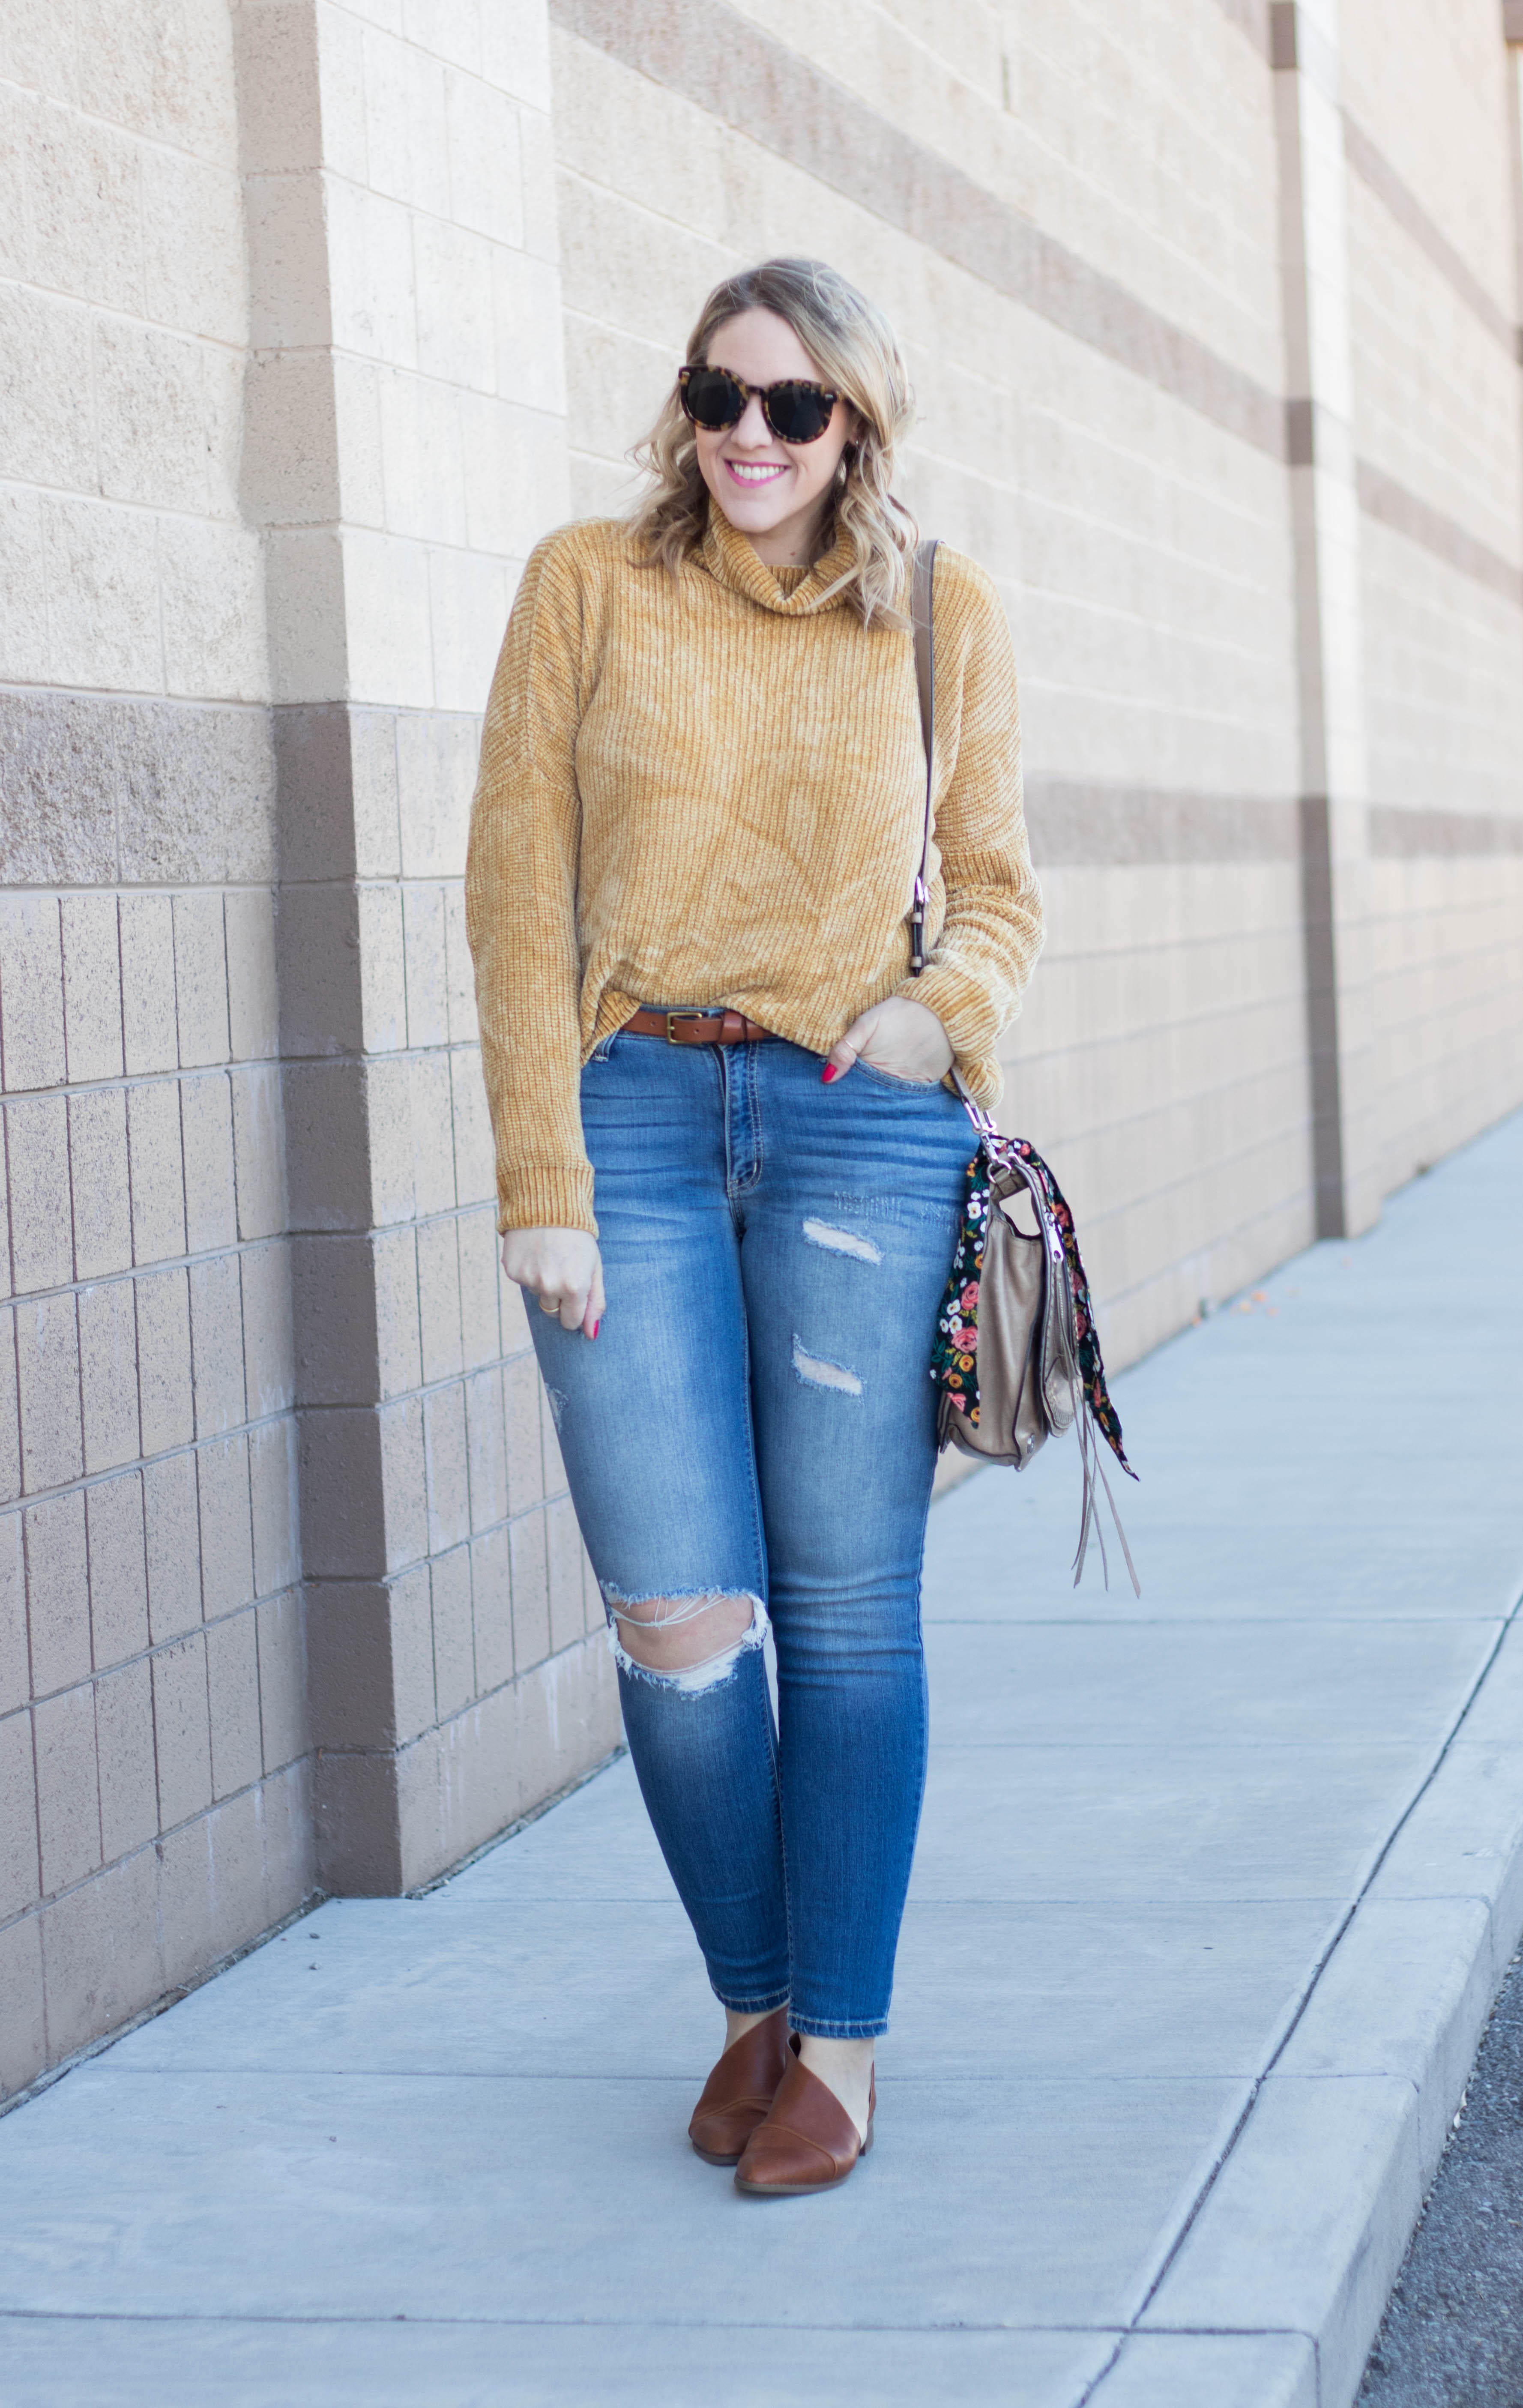 two ways to wear mustard yellow #yellow #winterstyle #bellaellaboutique